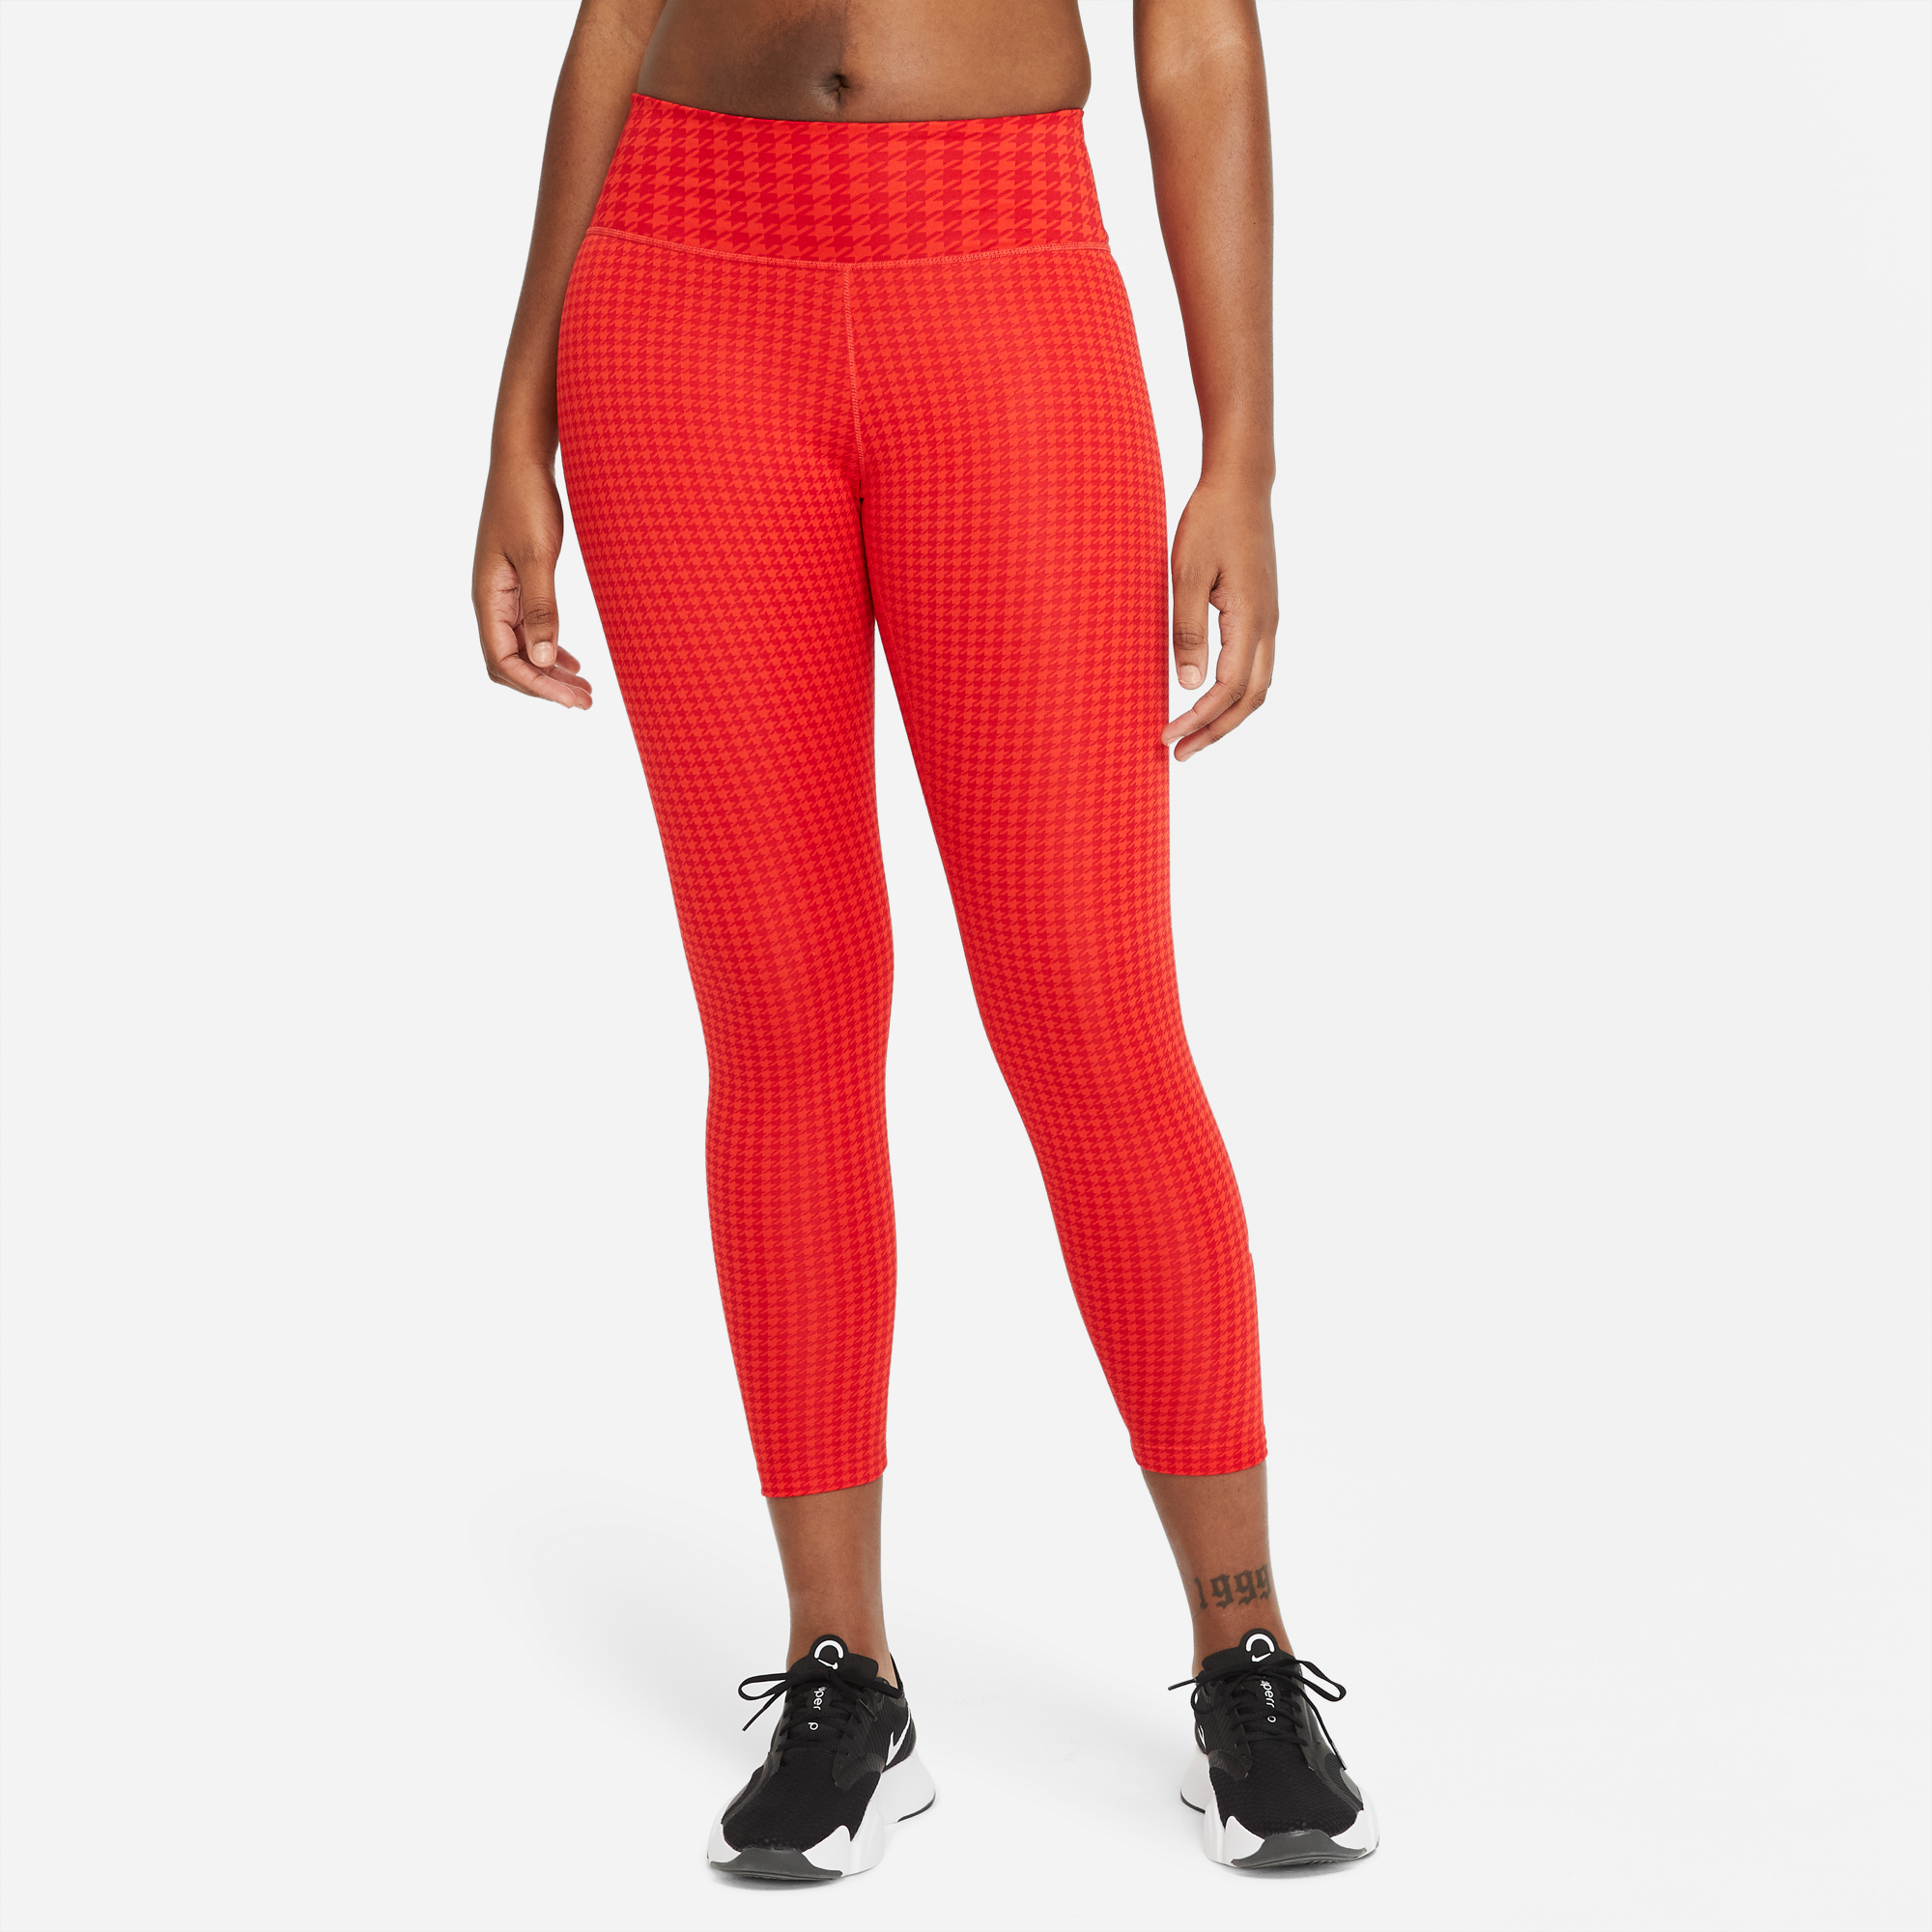 Nike Women's Dri FIT Fast Crop Tights (Chile Red/Reflective Silv, Size XL)